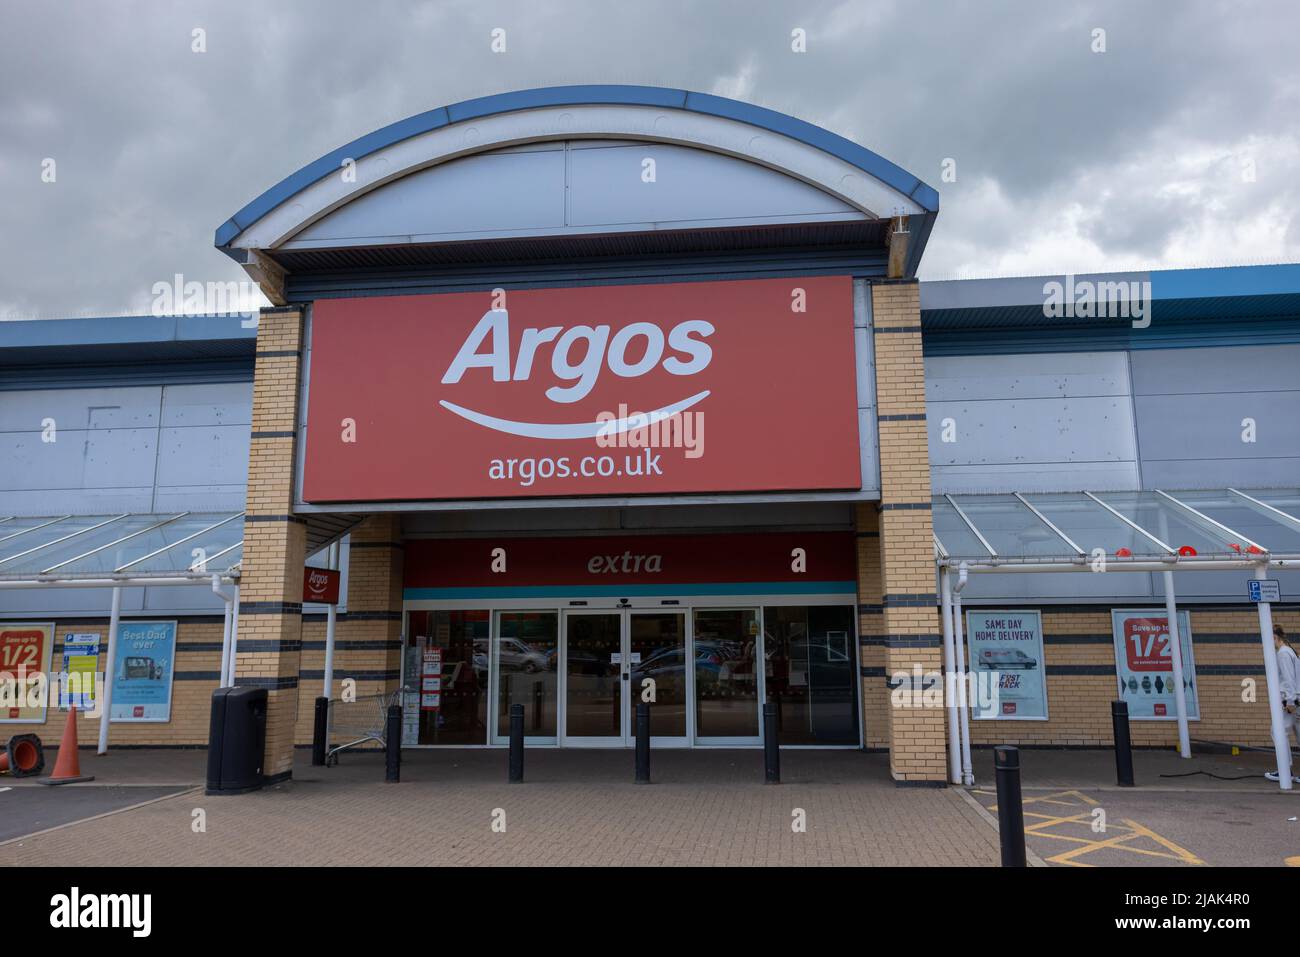 Argos store entrance. Big red and white sign over glass doors. Argos is a British catalogue and shop retailer in the UK Stock Photo